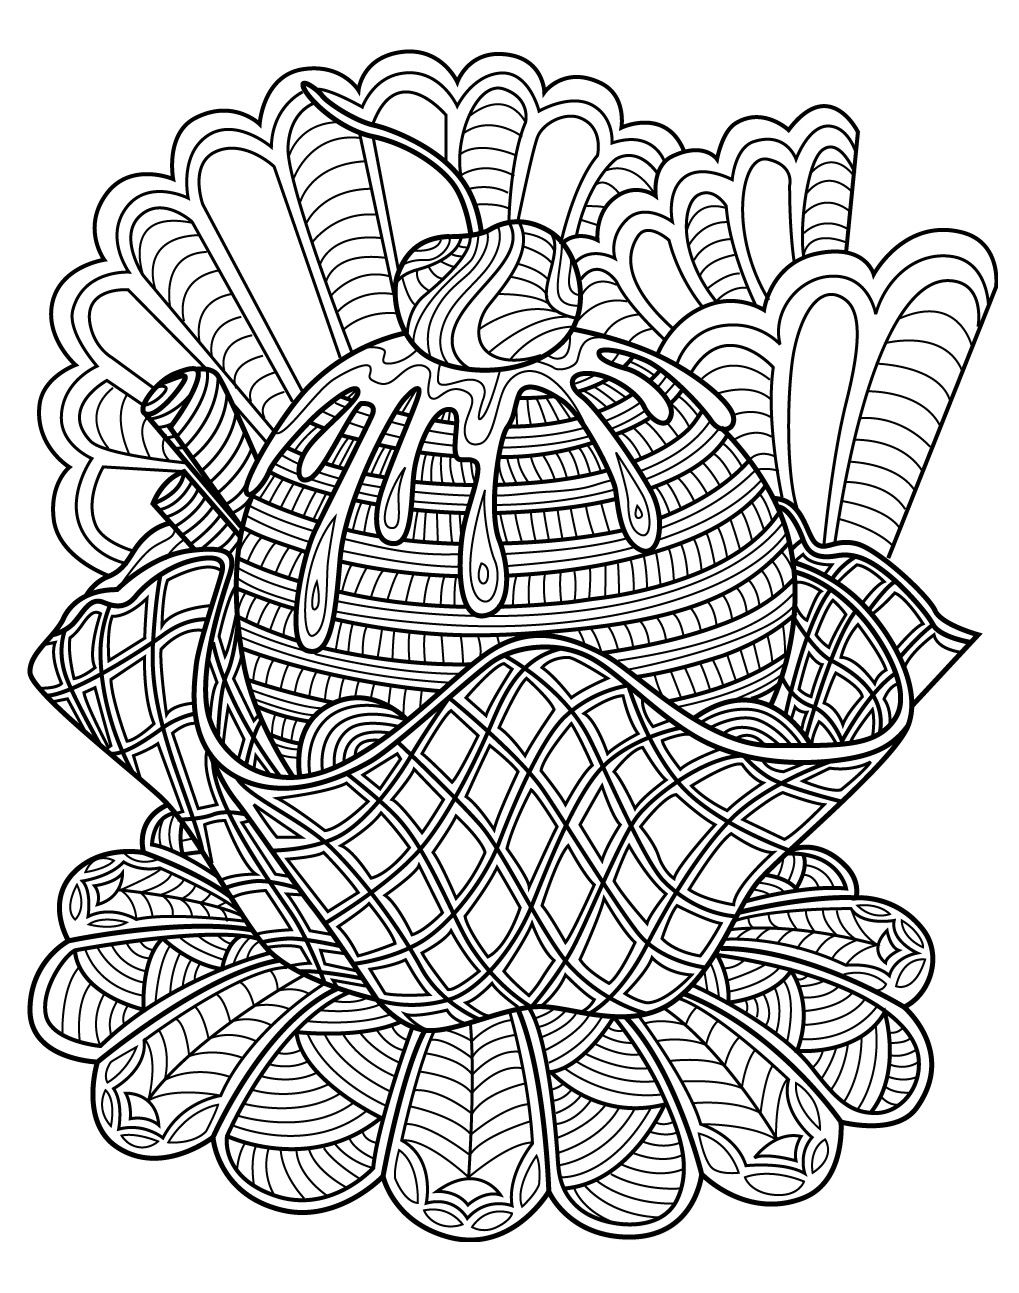 Sweets coloring page | Colorish: free coloring app for ...